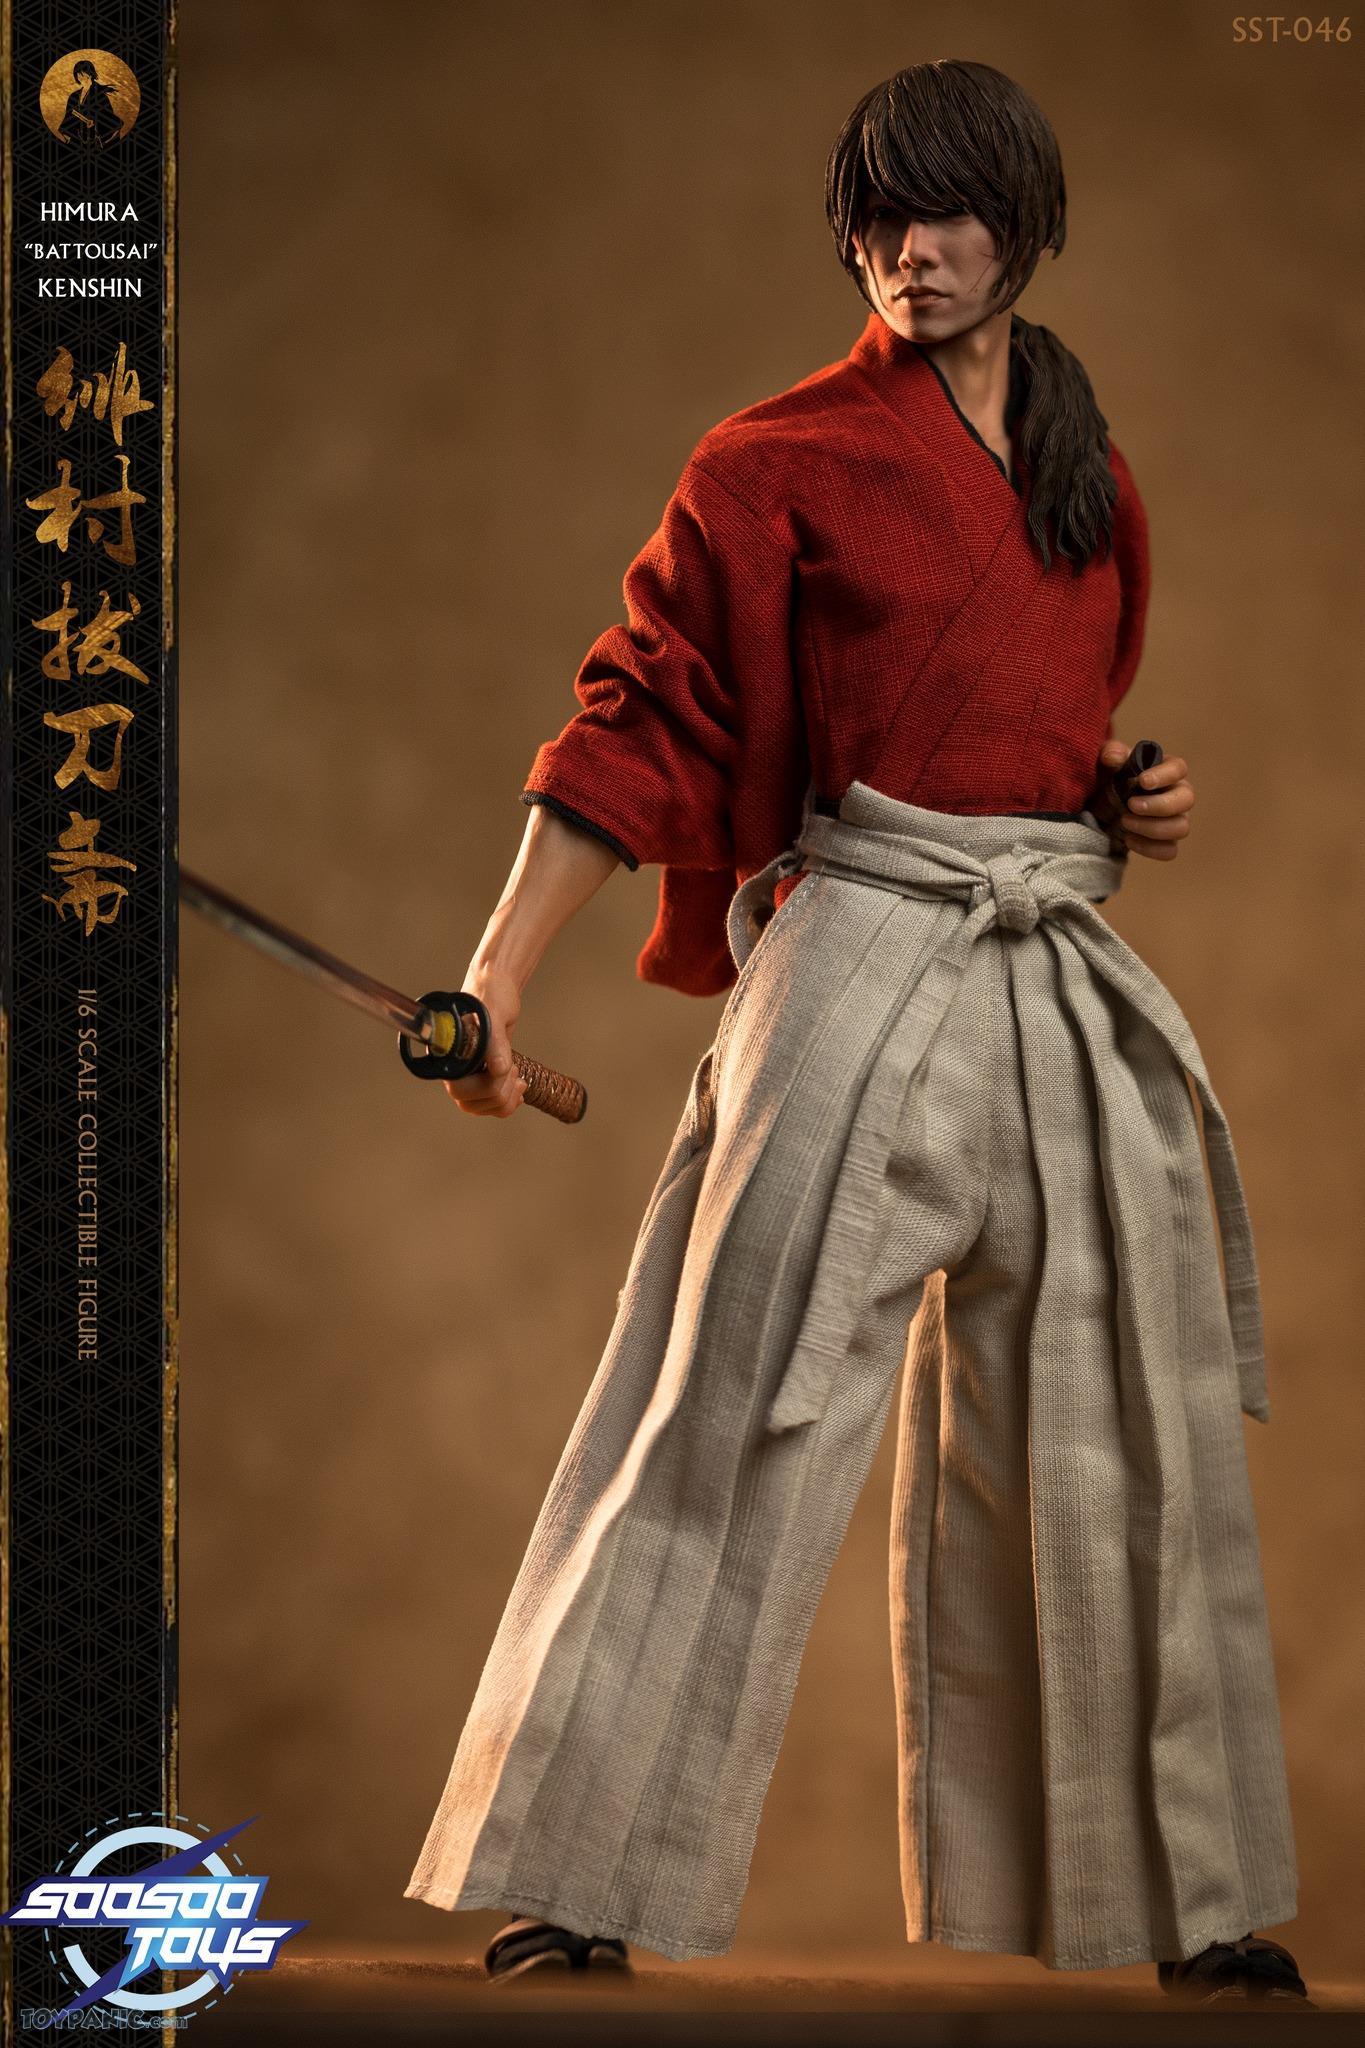 himura - NEW PRODUCT: 1/6 scale Rurouni Kenshin Collectible Figure from SooSooToys 712202251232PM_7300100